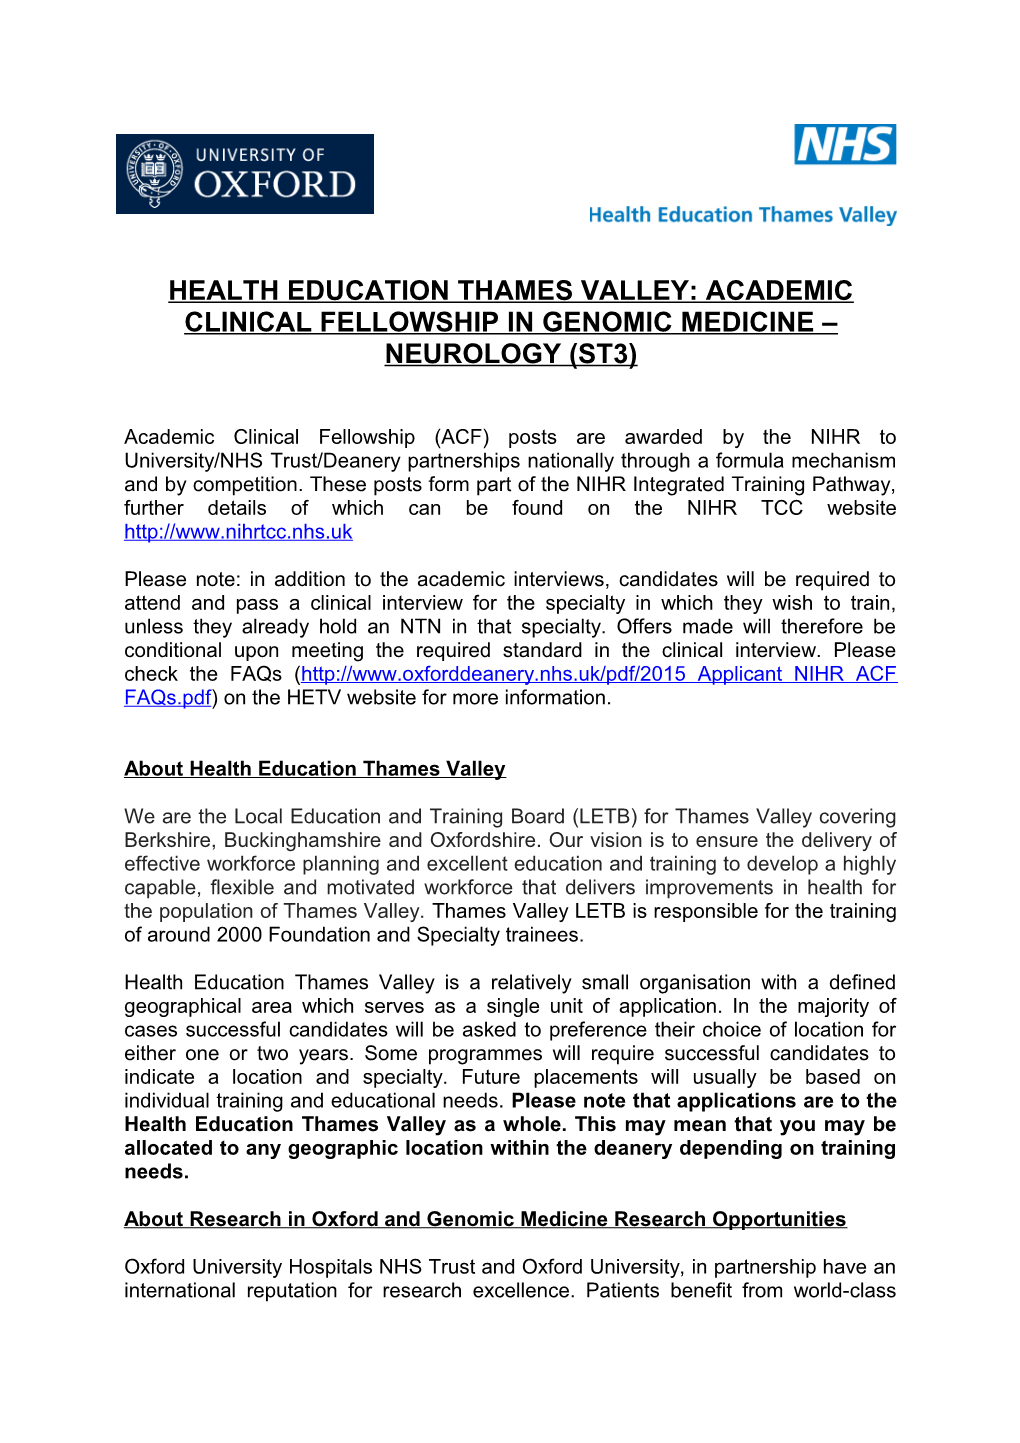 Health Education Thames Valley: Academic Clinical Fellowship in Genomic Medicine Neurology